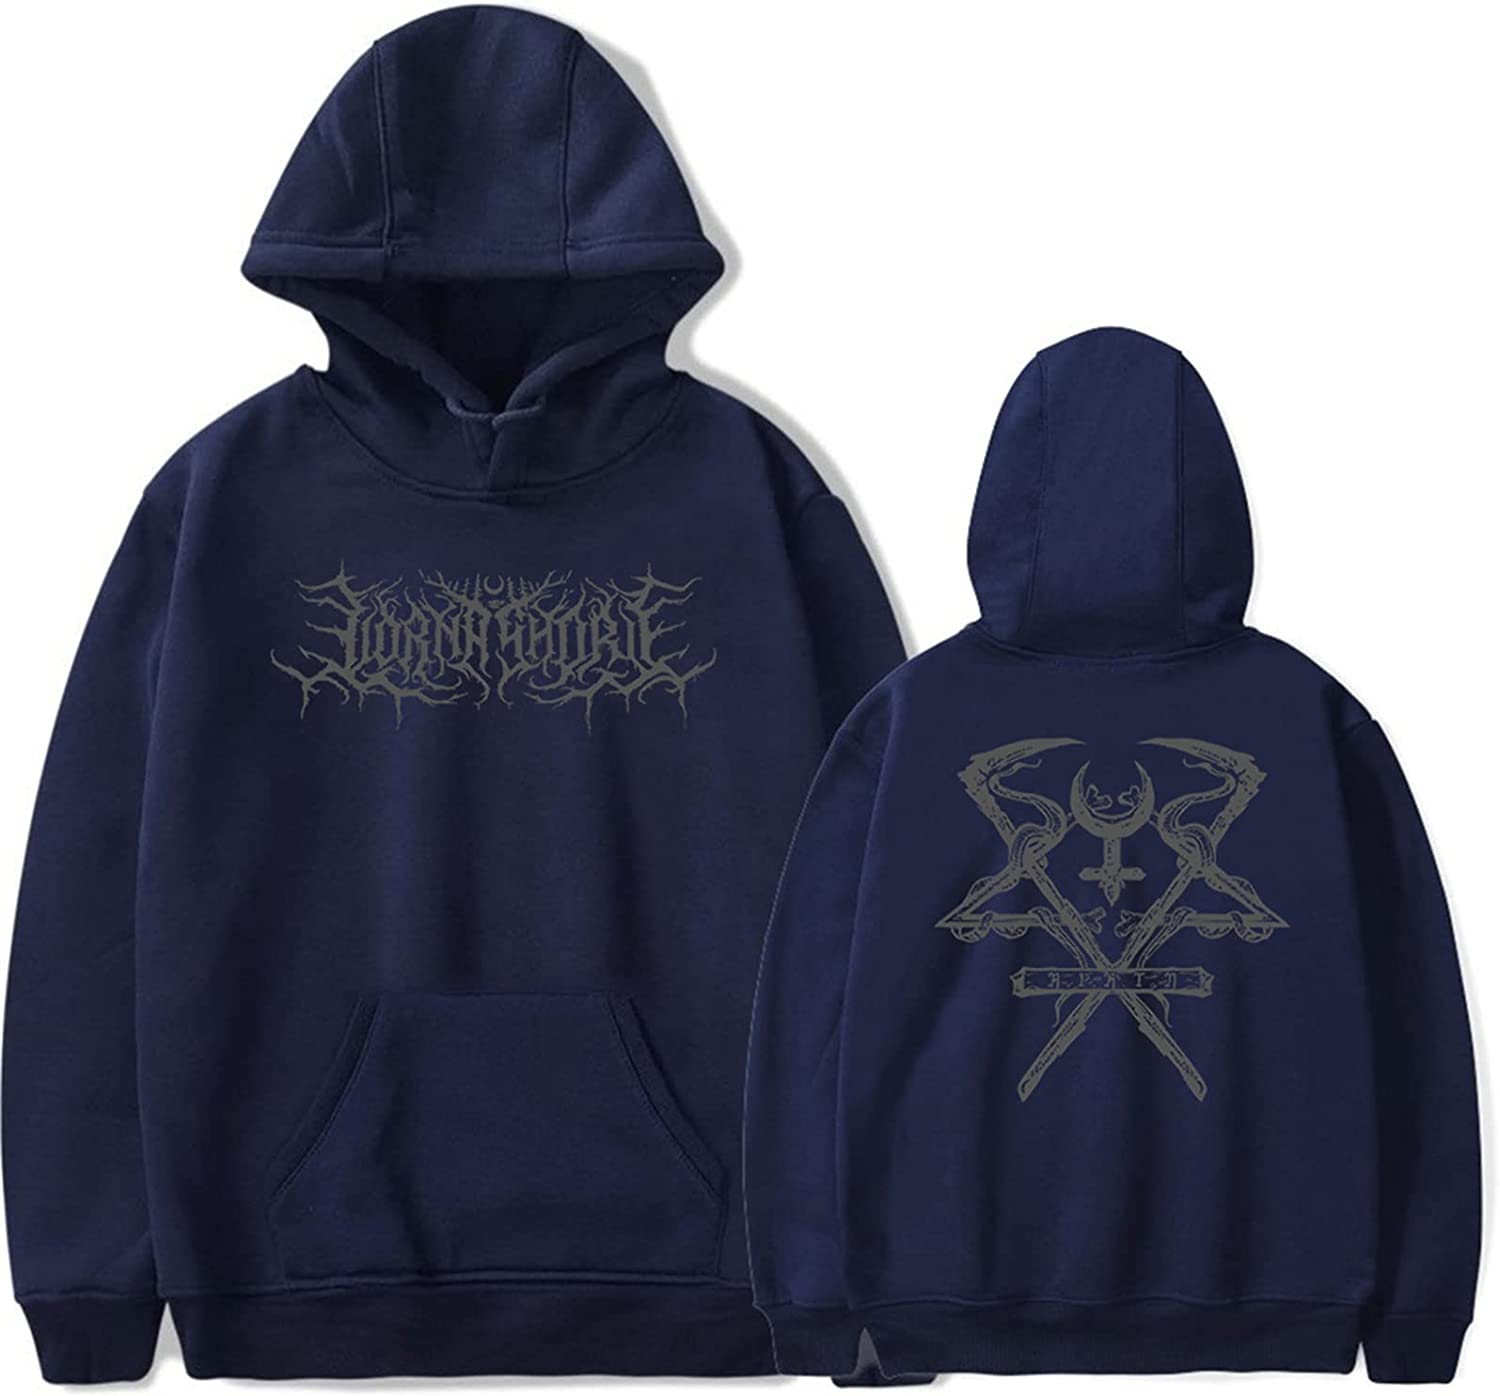 Lorna Shore Hoodies – Logo Printed Front Pullover Colorful Hoodie 1 - Lorna Shore Store